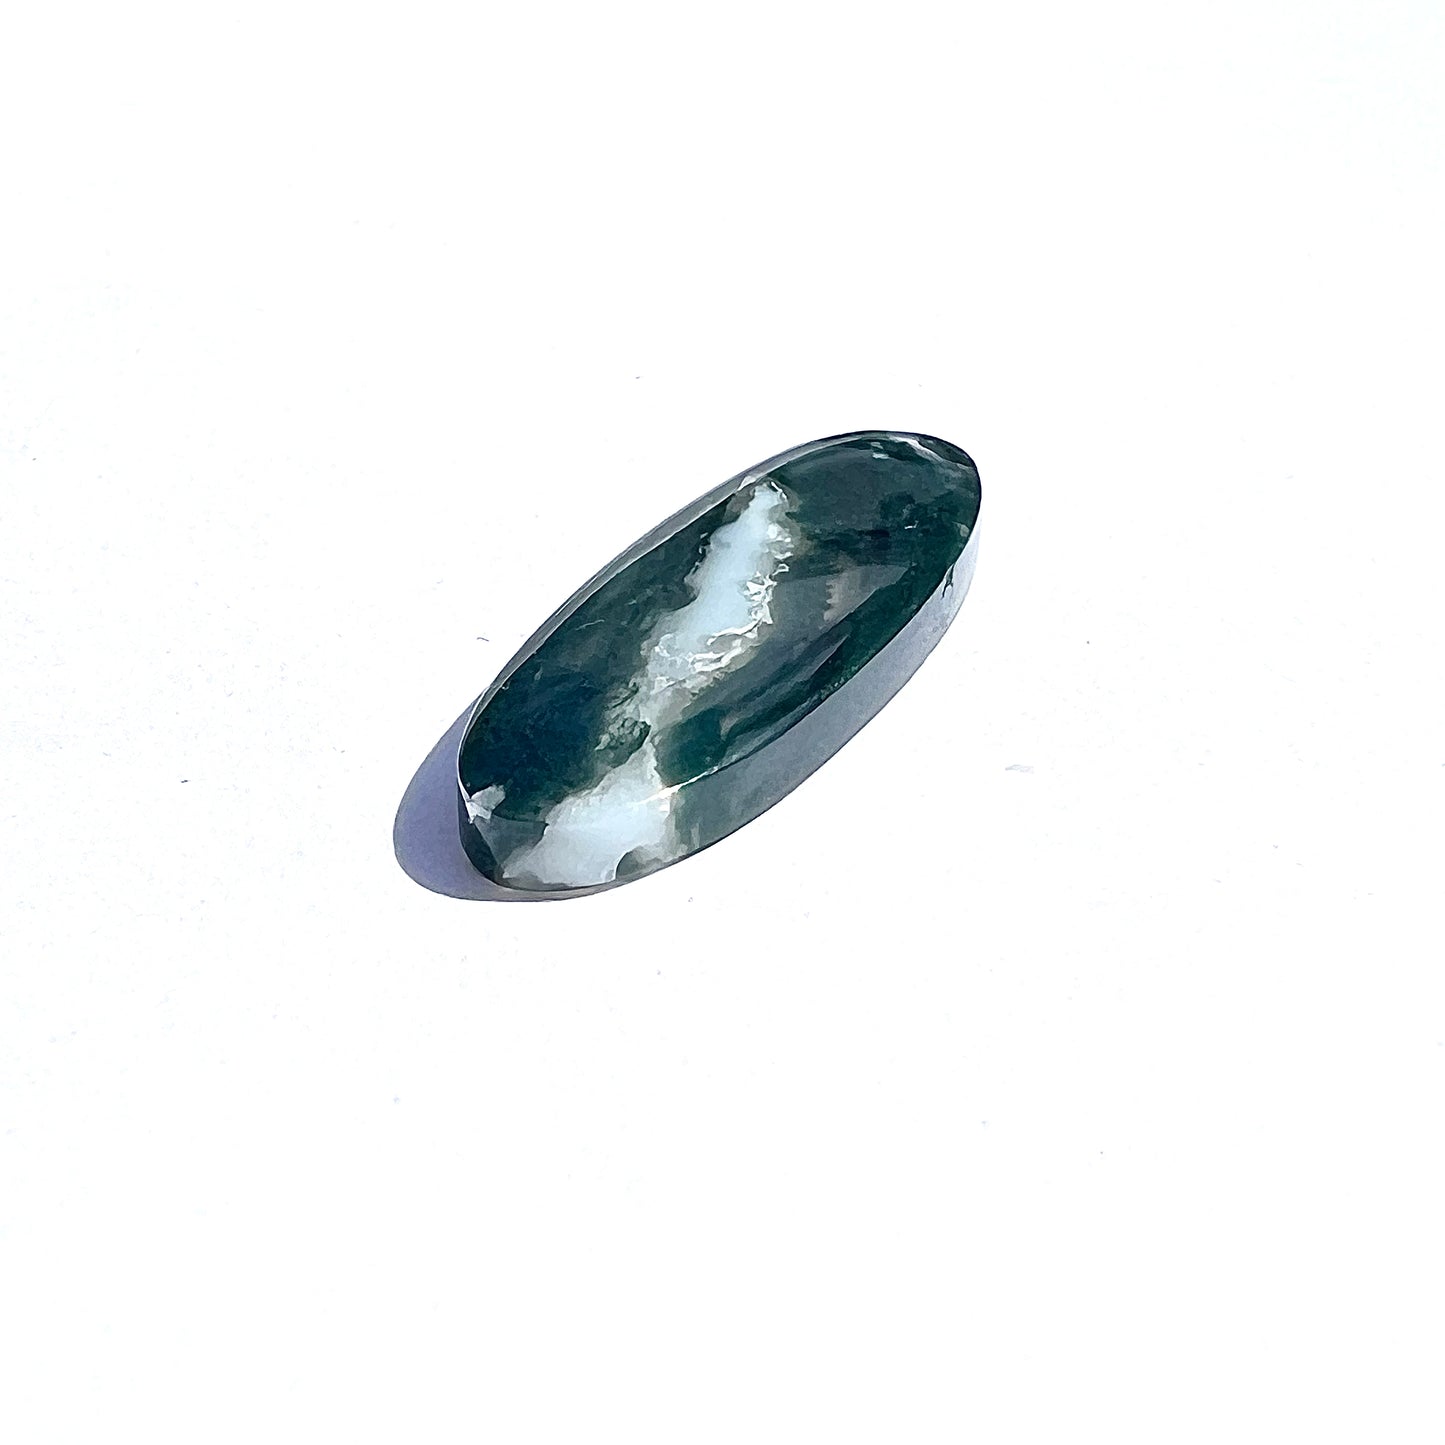 Moss Agate Tablet, 9.21 cts